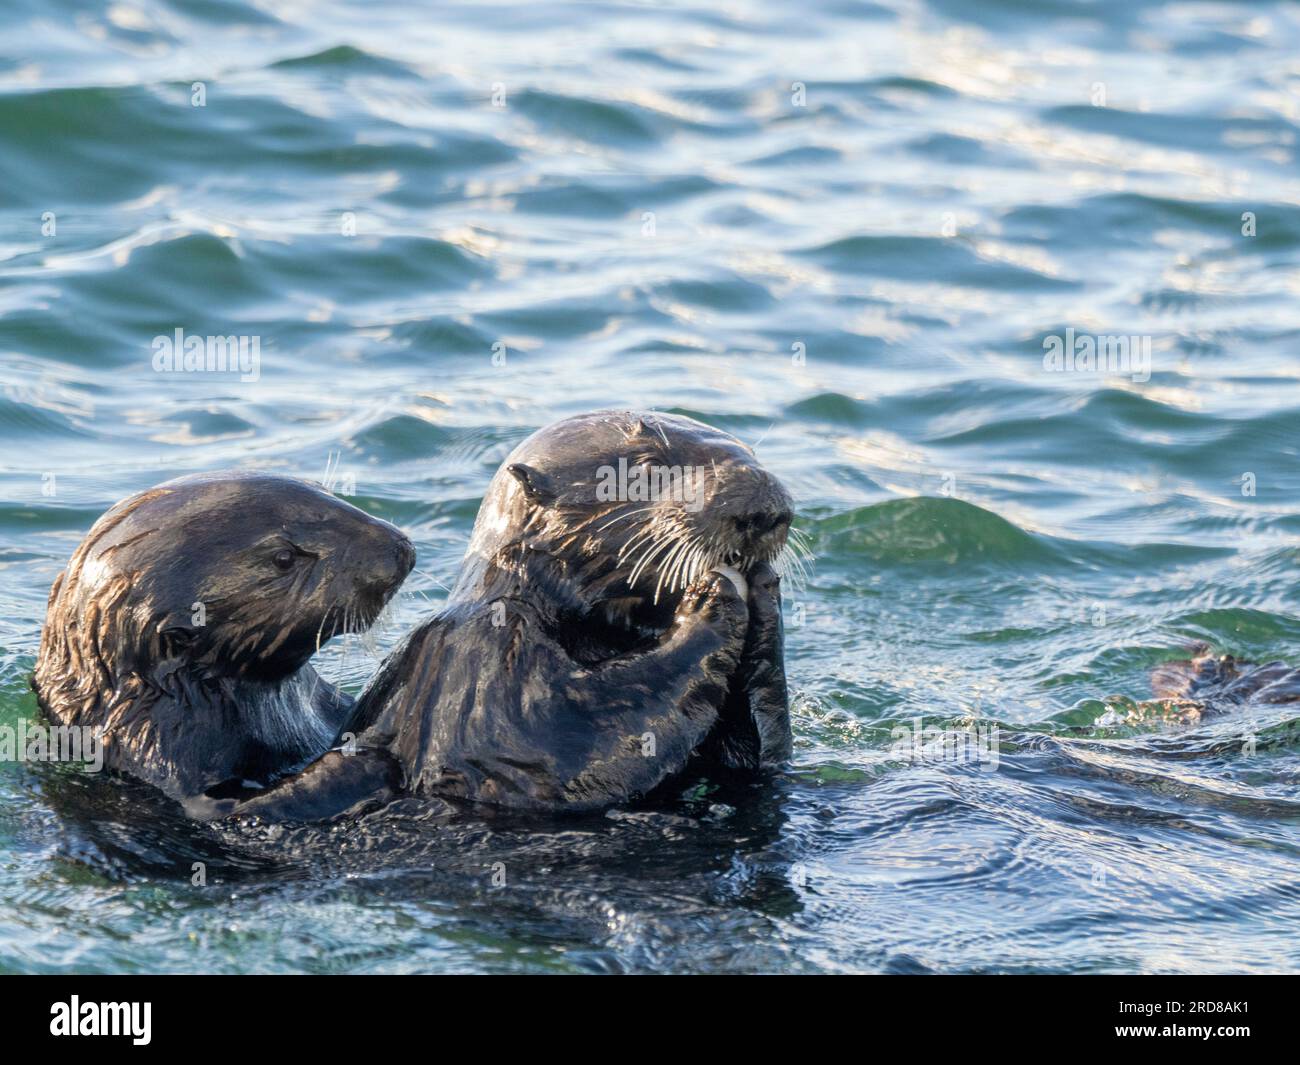 Mother and pup sea otter (Enhydra lutris), together in Monterey Bay National Marine Sanctuary, California, United States of America, North America Stock Photo